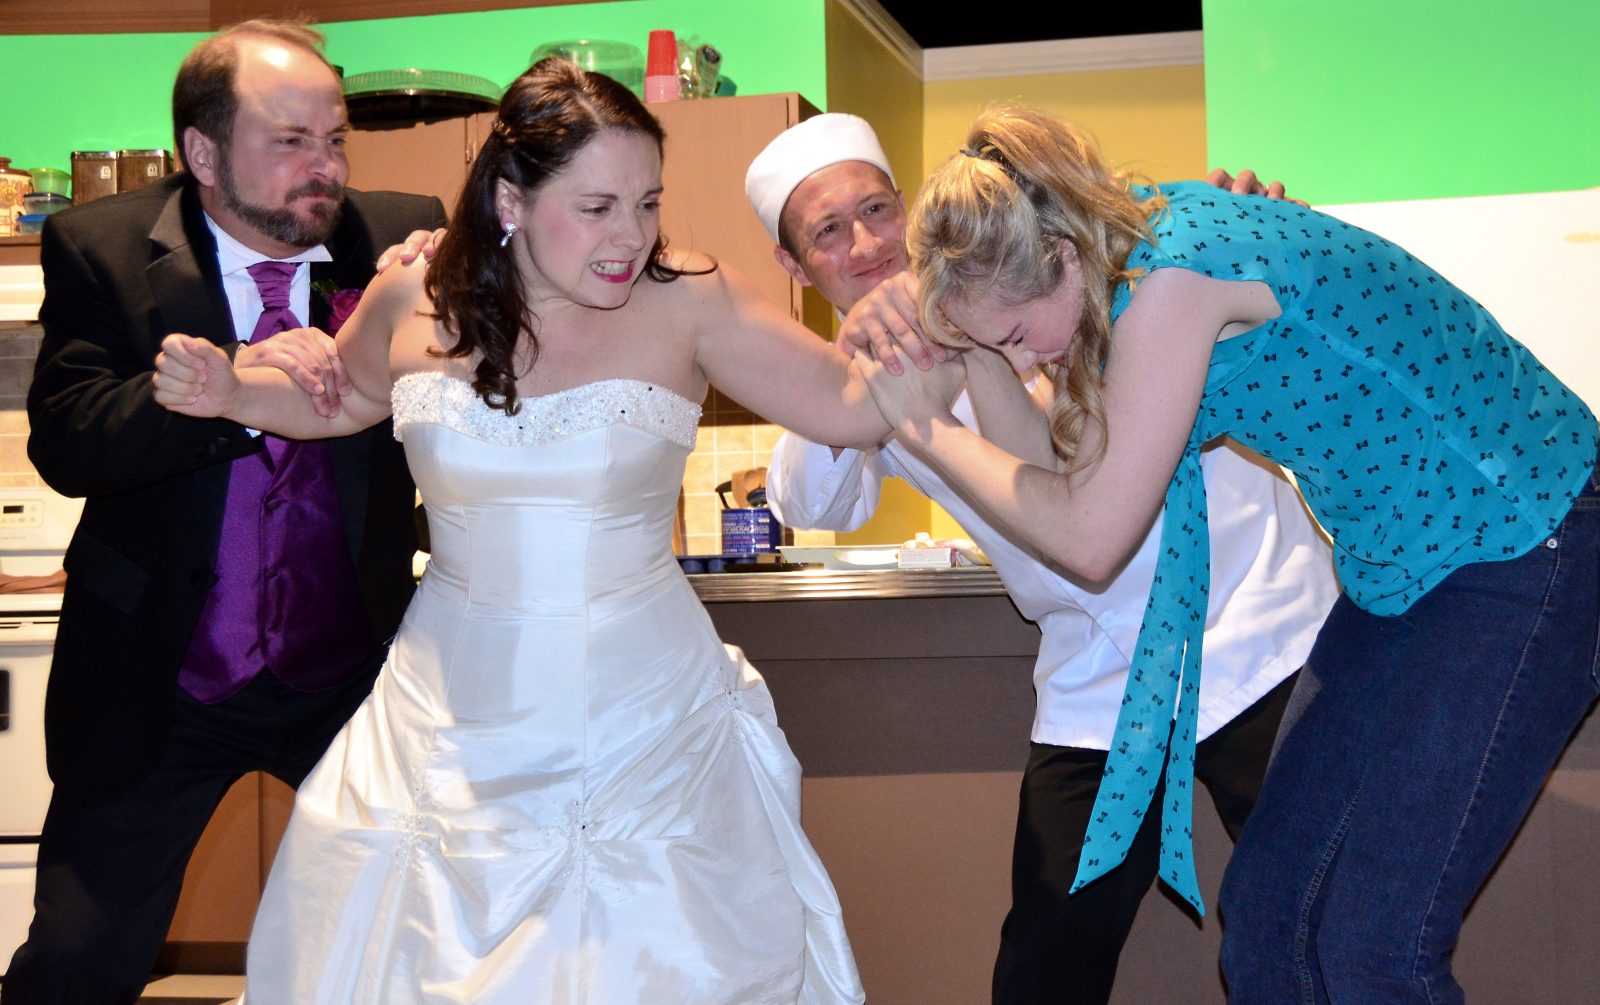 Playhouse opener takes a look at small town weddings